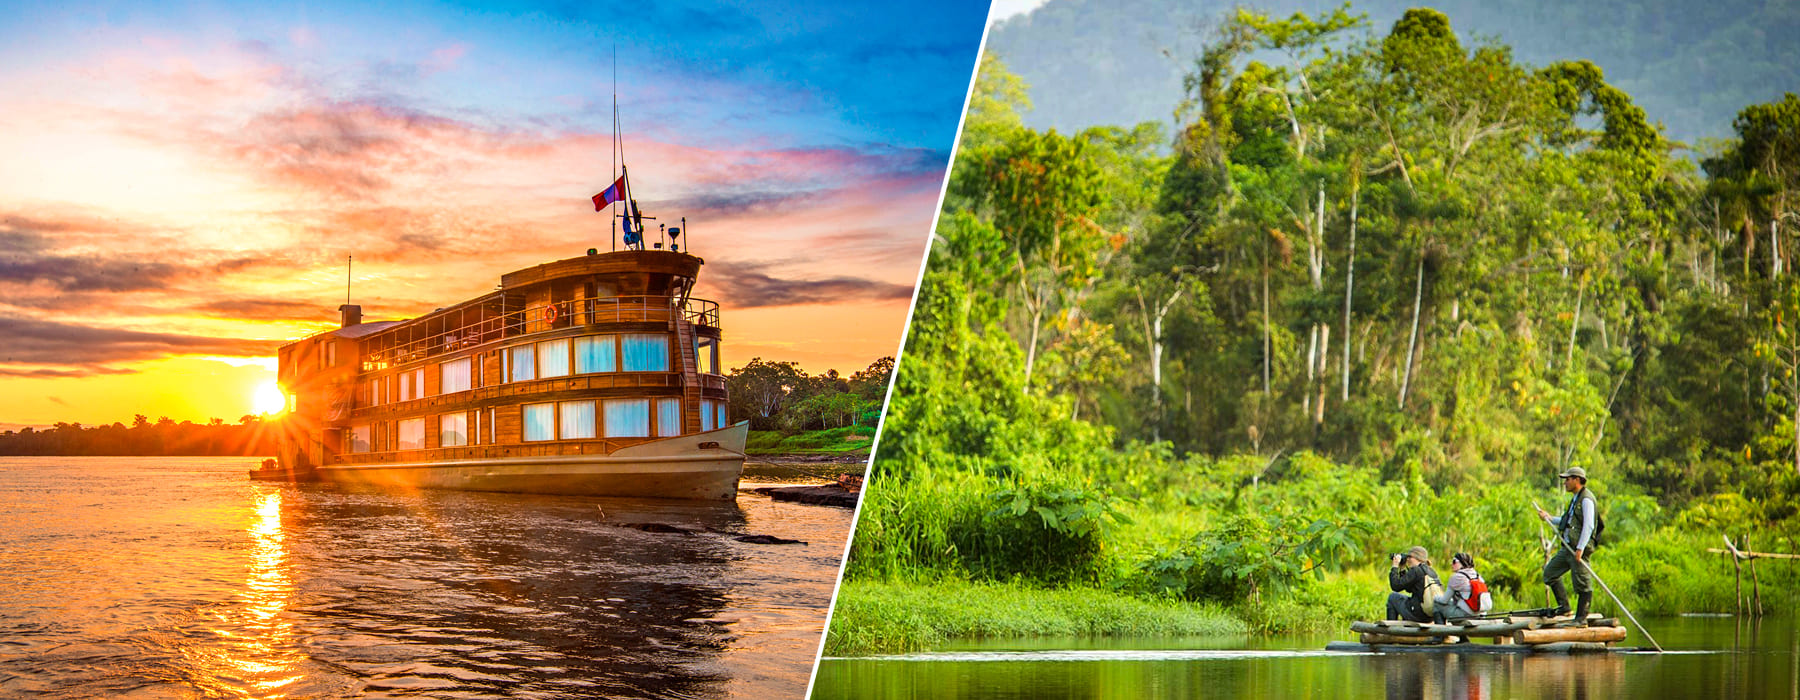 MANU NATIONAL PARK OR IQUITOS: WHAT IS THE BEST AMAZON AREA?